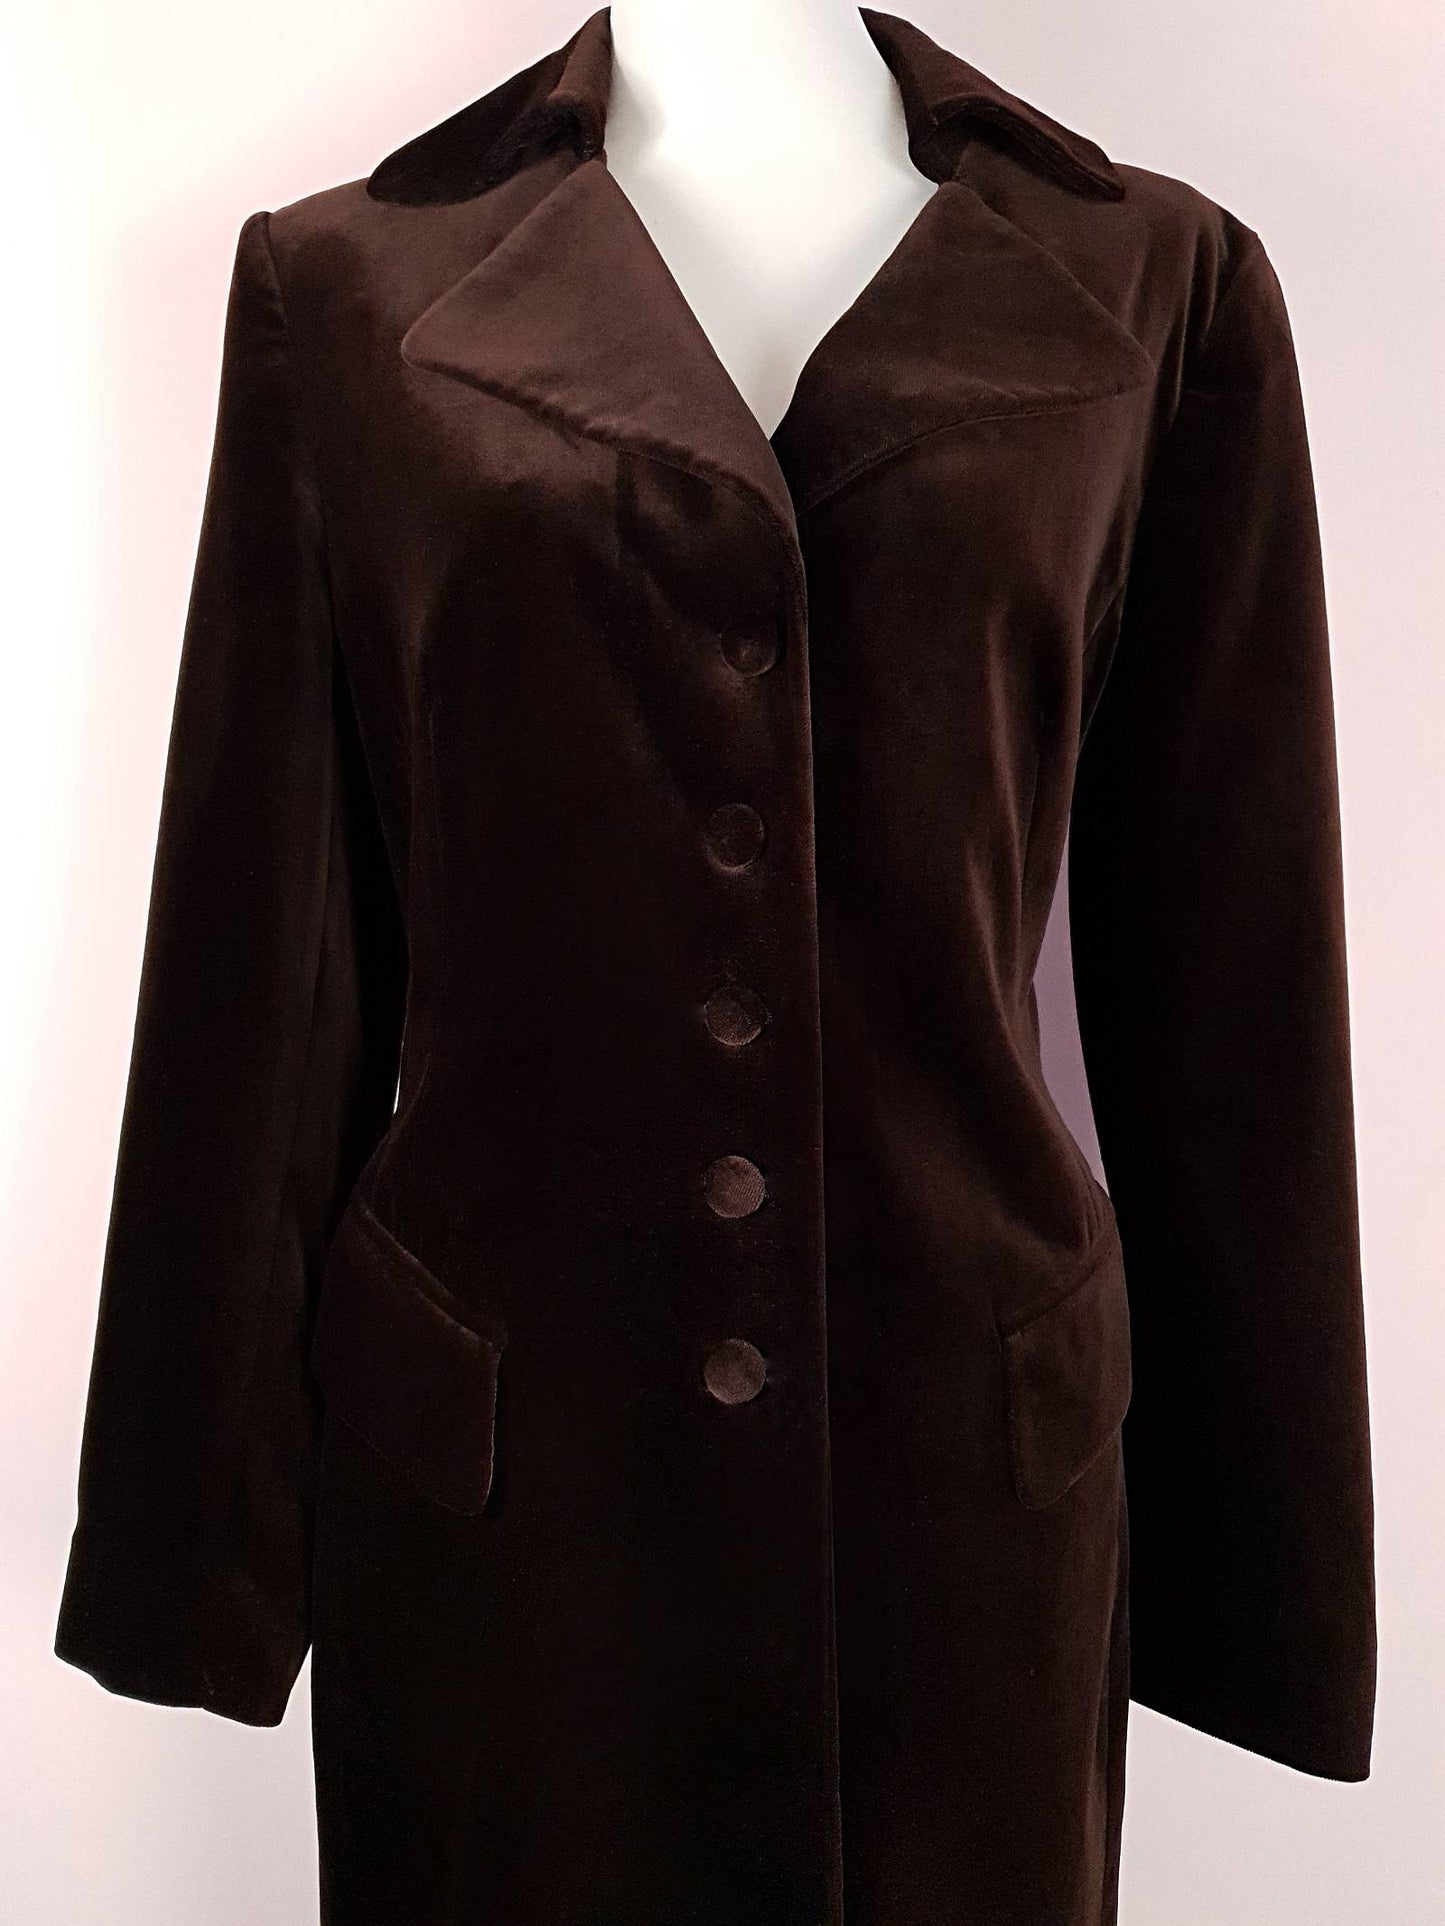 English Classics - Pre-Loved 1990s Mulberry Chocolate Brown Velvet Coat - Size 16